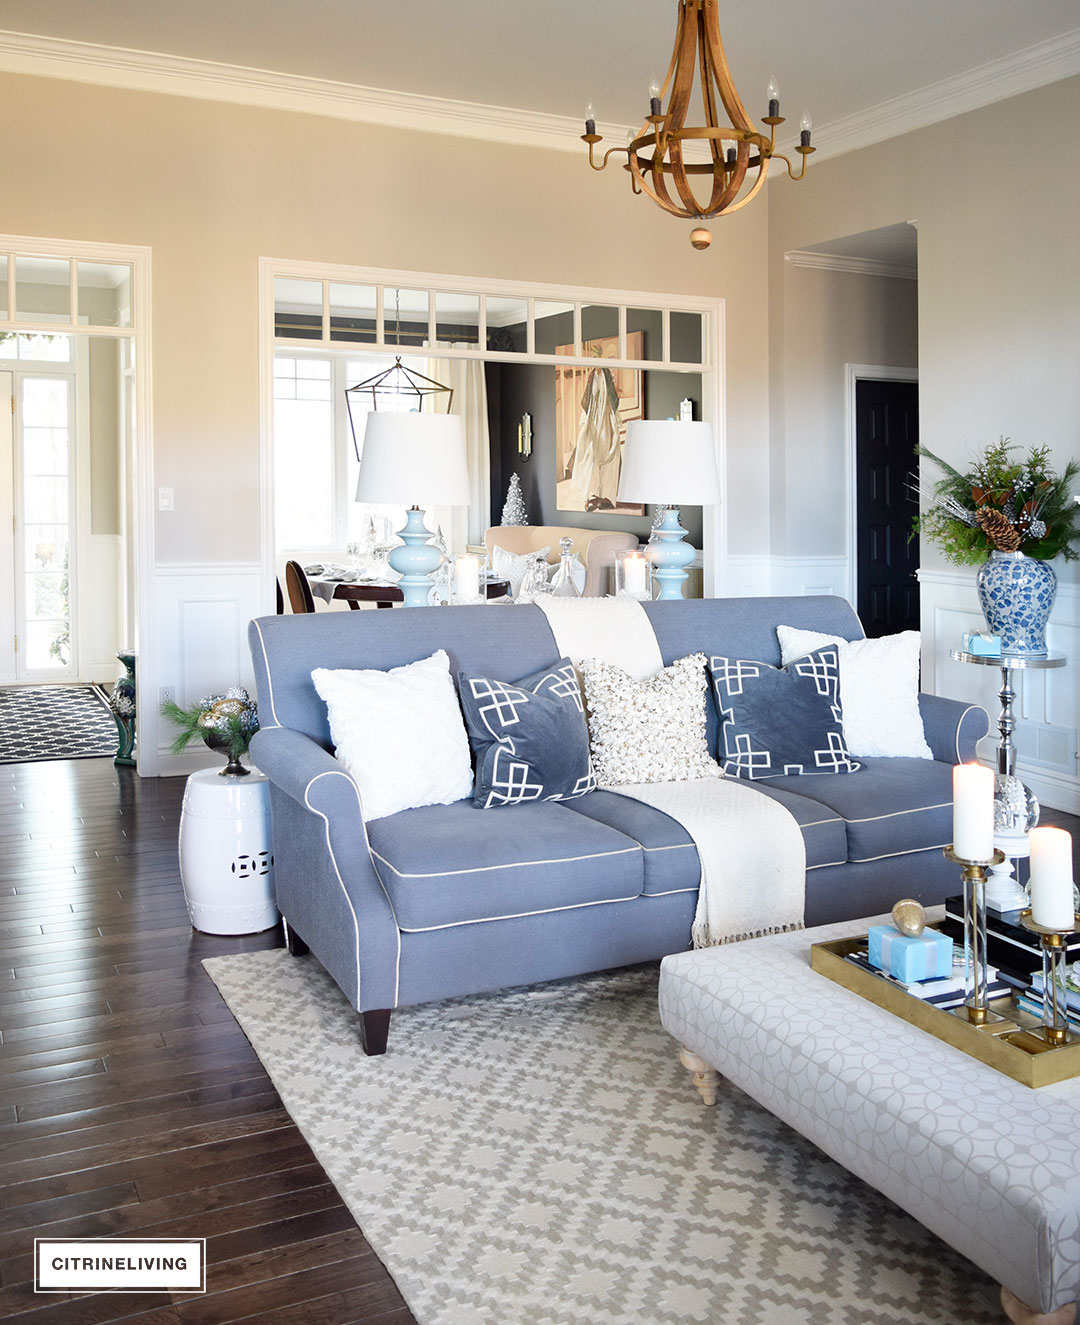 Christmas Home Tour - Gorgeous living room with beautiful metallics and icy blue create a chic Holiday theme